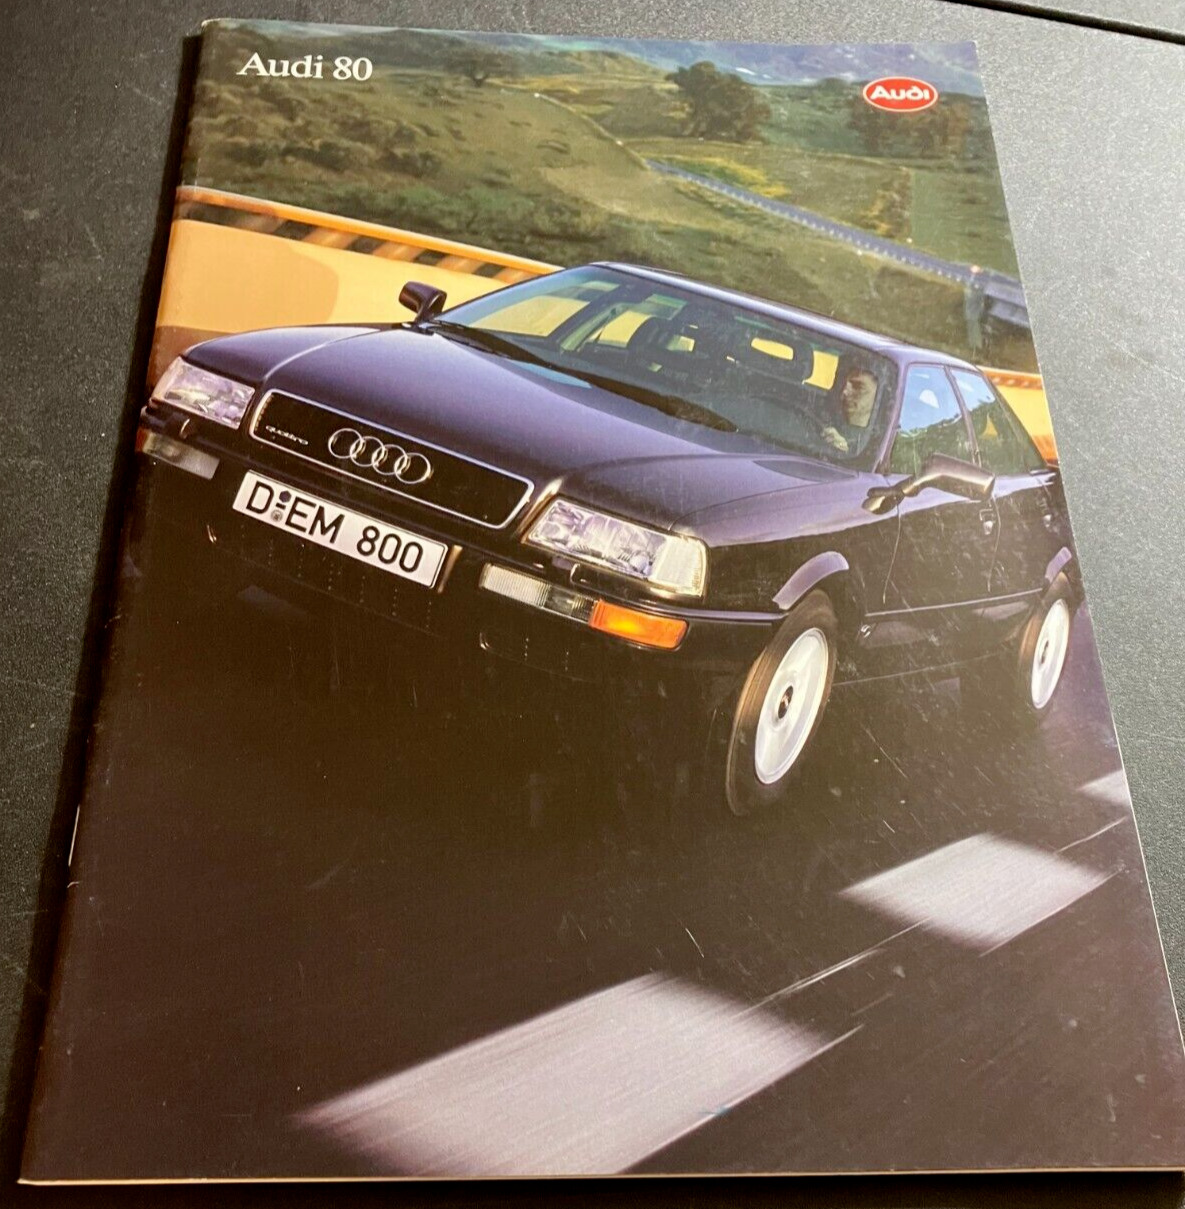 1993 Audi 80 - Vintage 44-page Dealer Sales Brochure with Options List - FRENCH